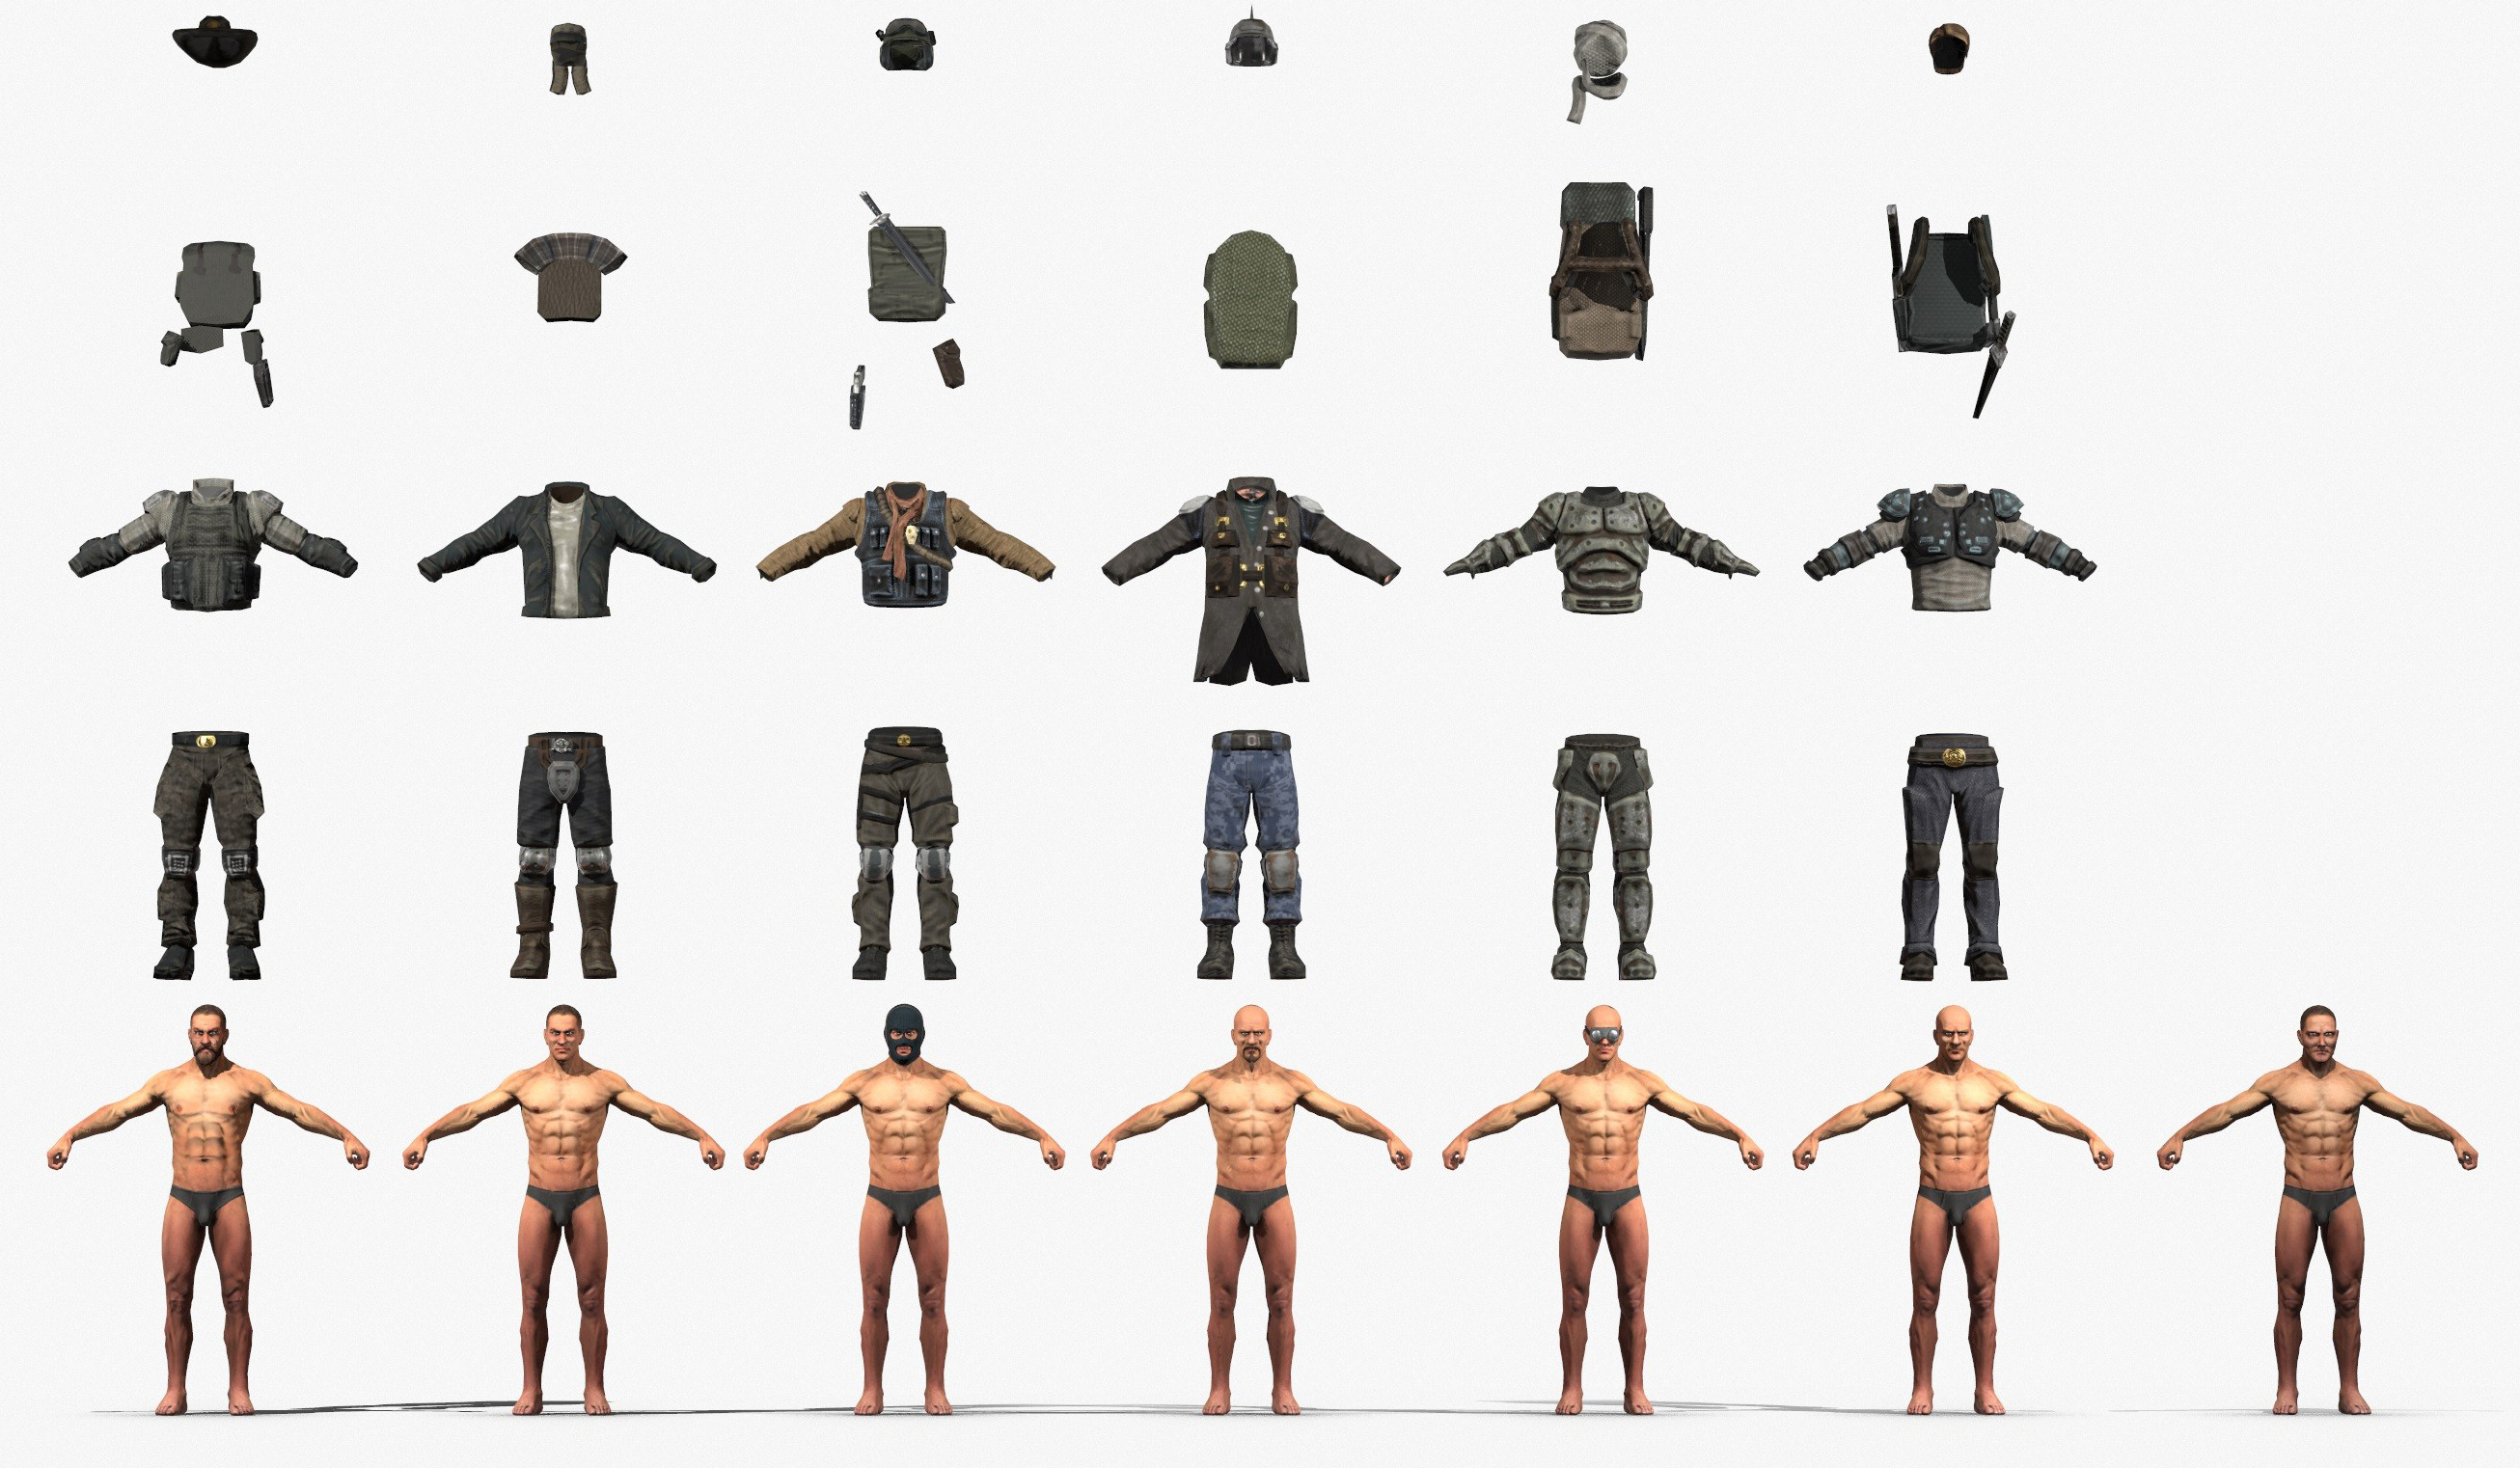 Wasteland 2 video game characters on TurboSquid